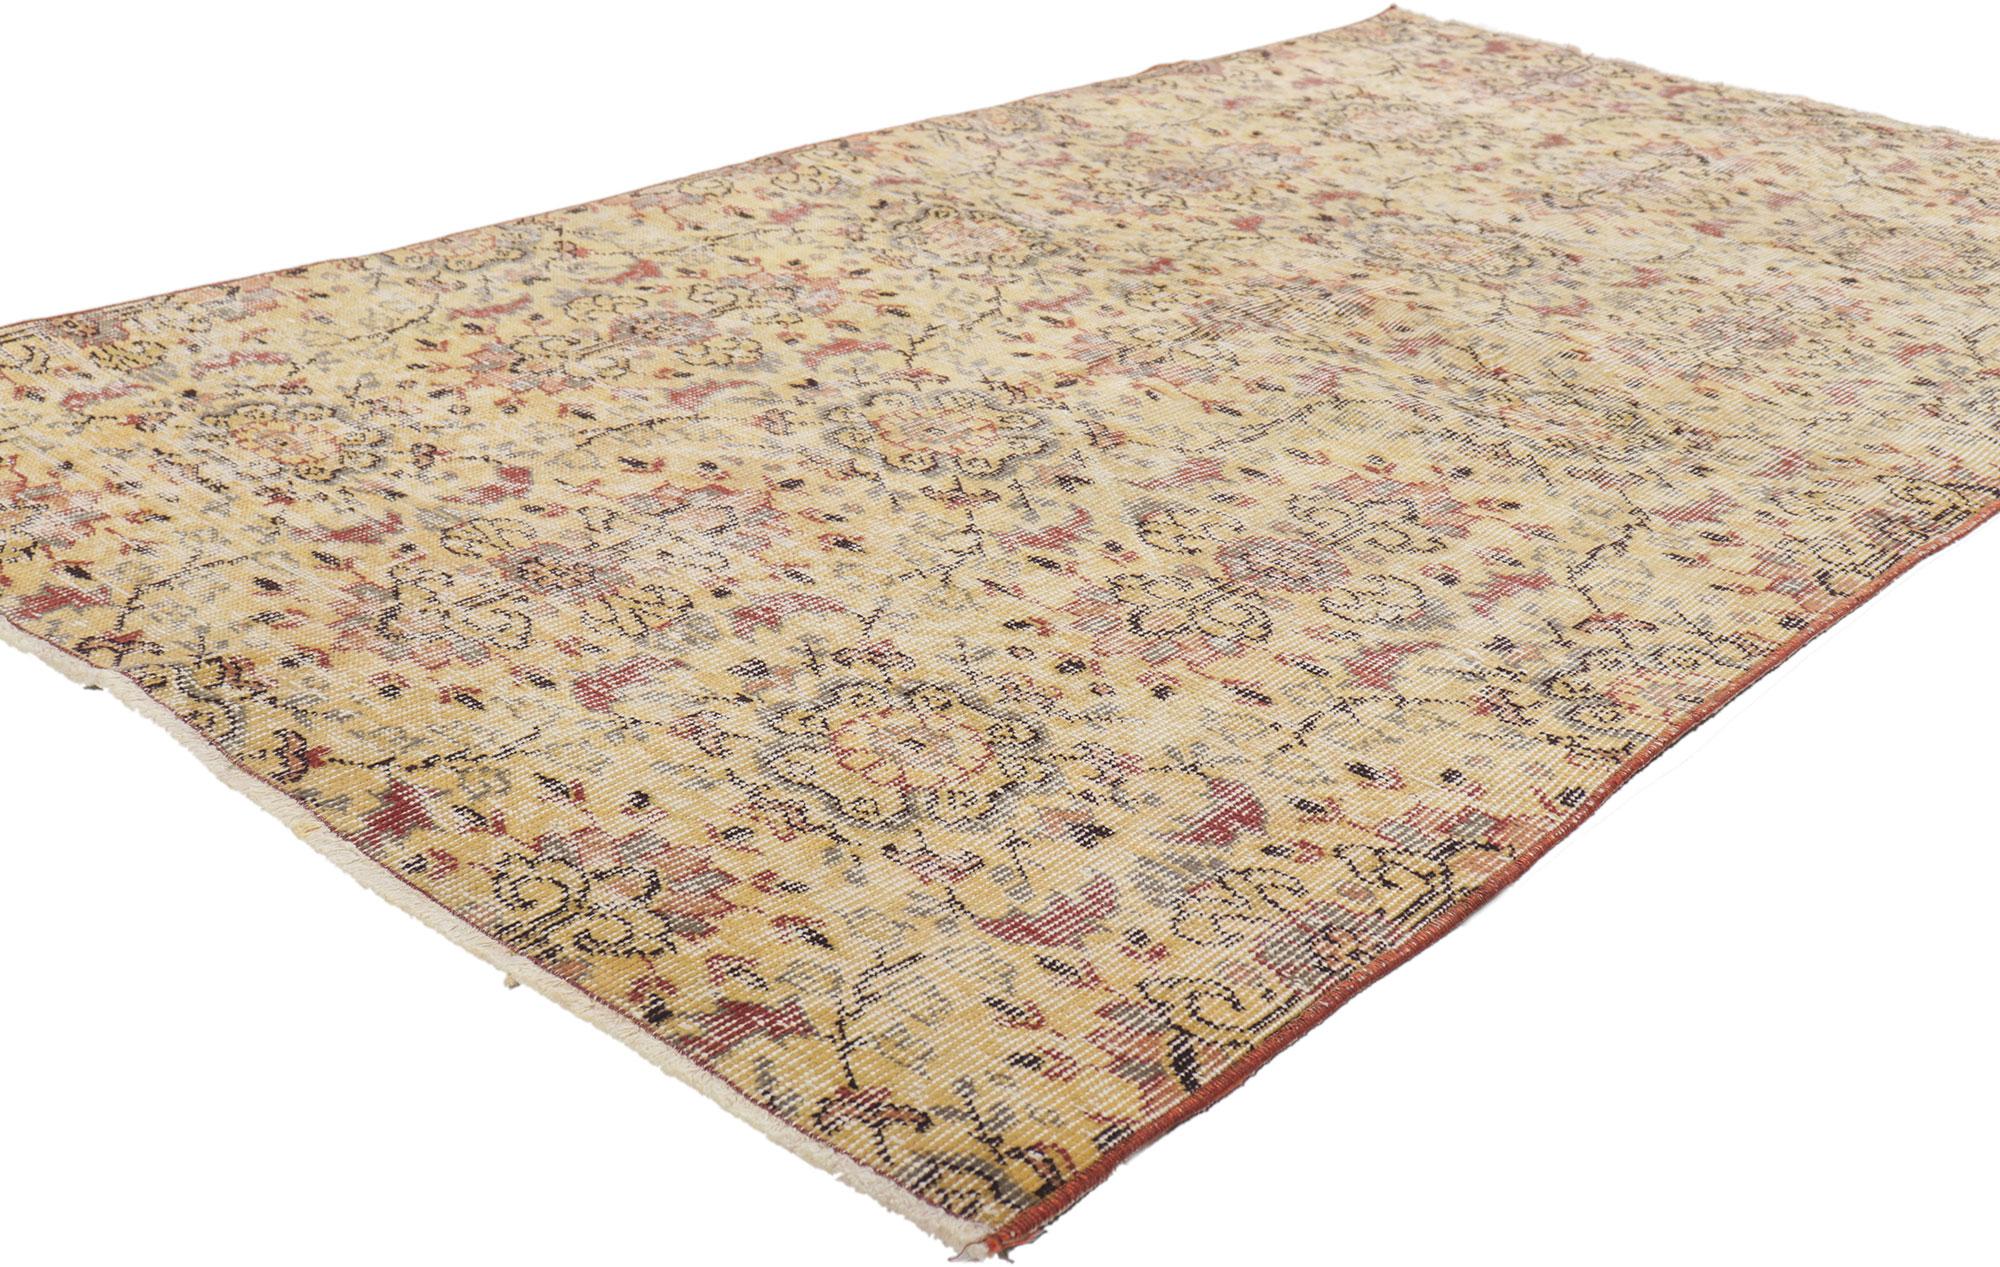 52590 Rustic French Country Vintage Turkish Sivas Rug, 03'09 x 06'09.
Warm and welcoming, this hand knotted wool distressed Turkish Sivas rug beautifully embodies French Country style. The field is covered in a softly rendered repeating floral